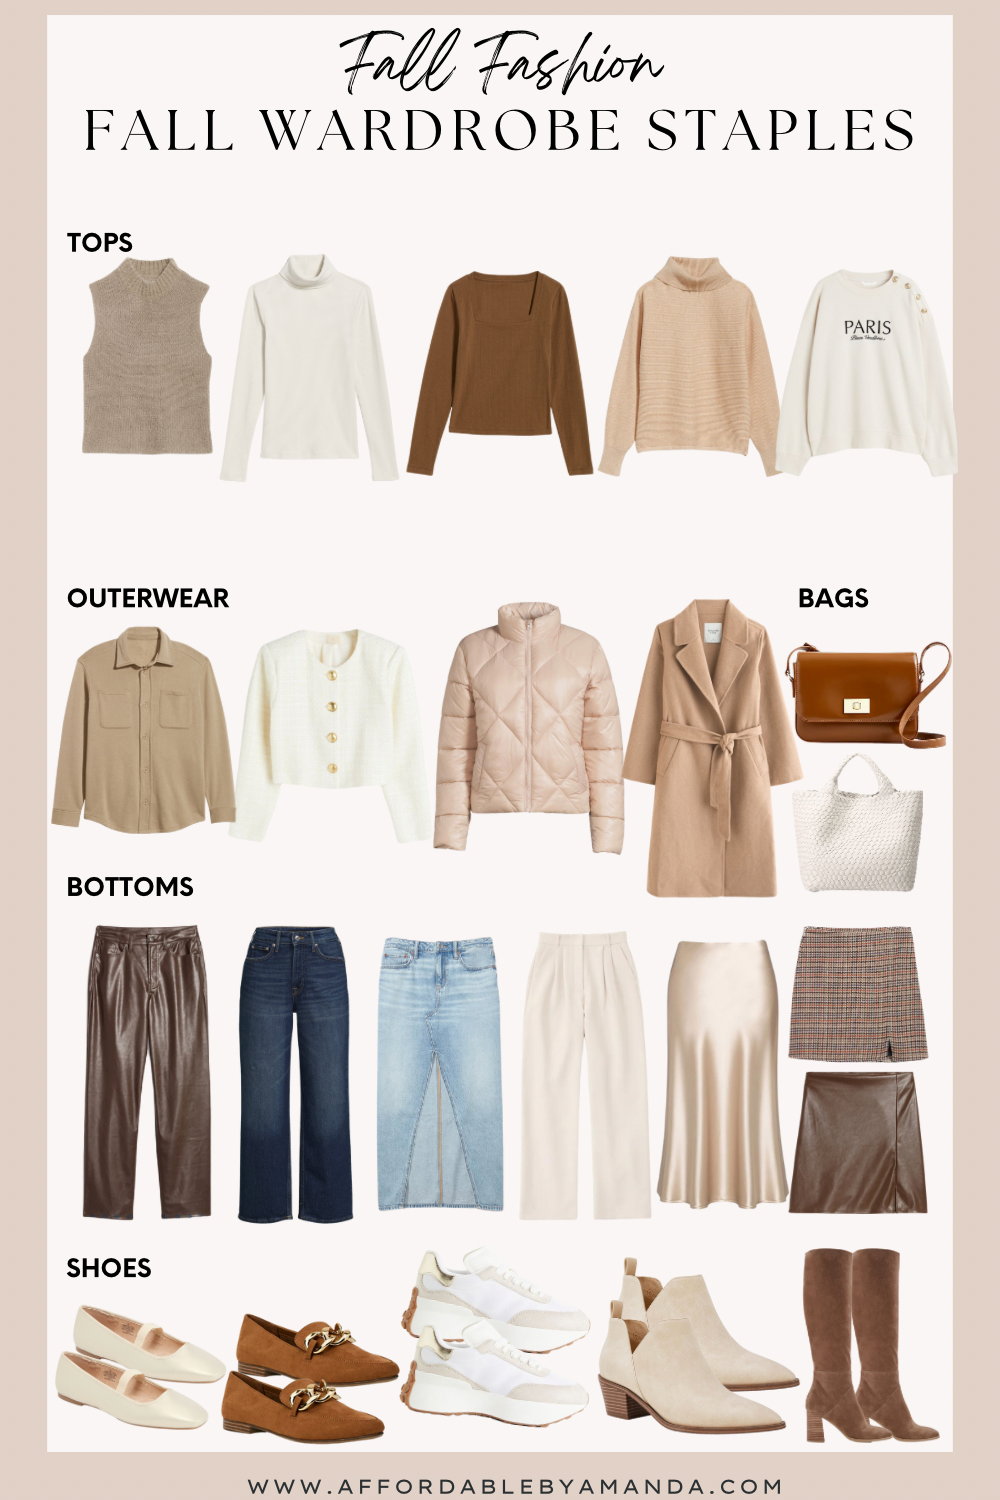 50+ Fall Capsule Wardrobe Essentials for 2023 - Affordable by Amanda shares fall staples and wardrobe essentials